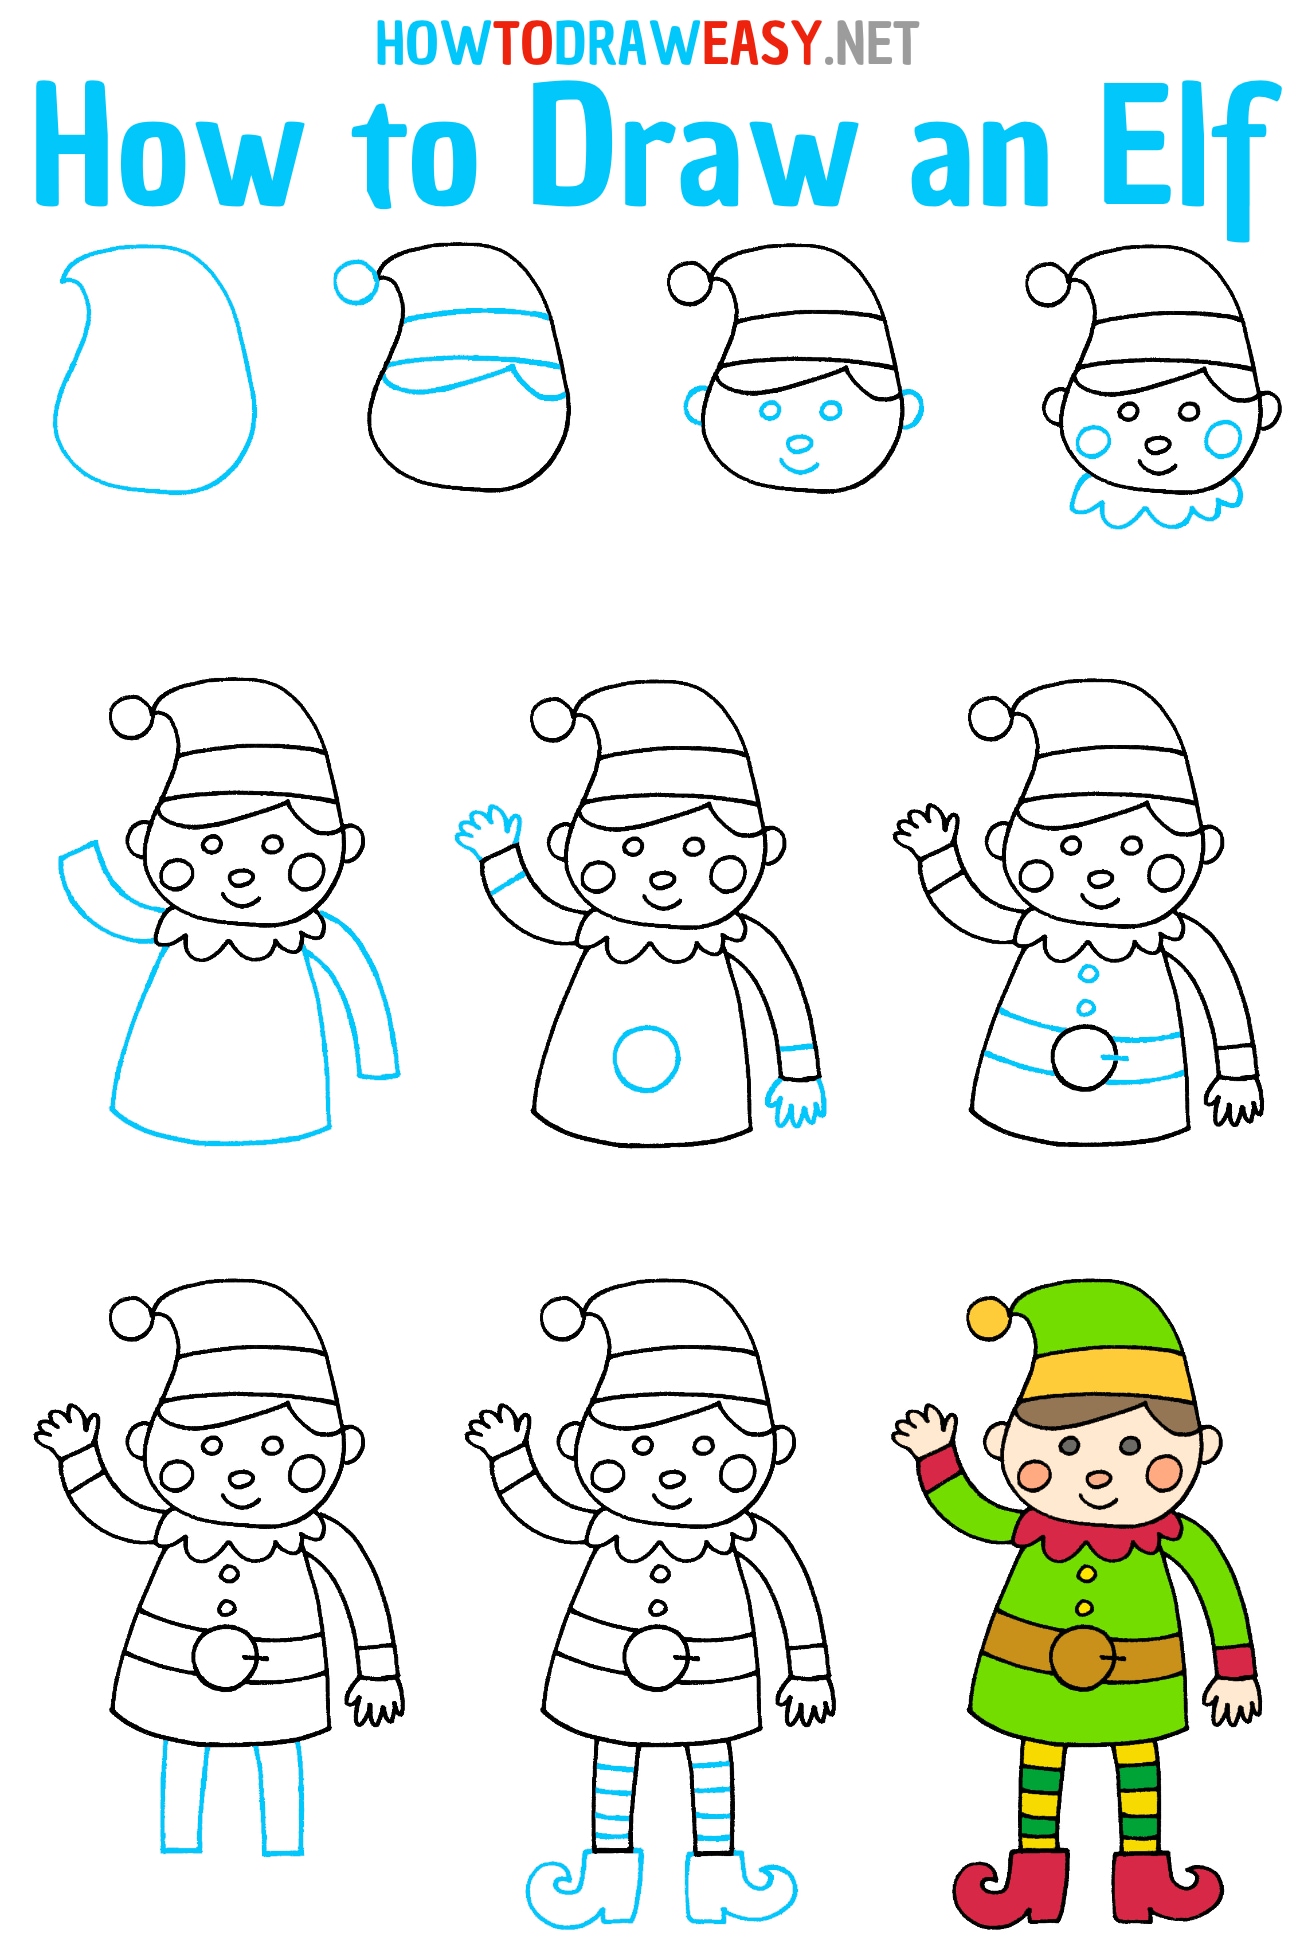 How to Draw an Elf Step by Step